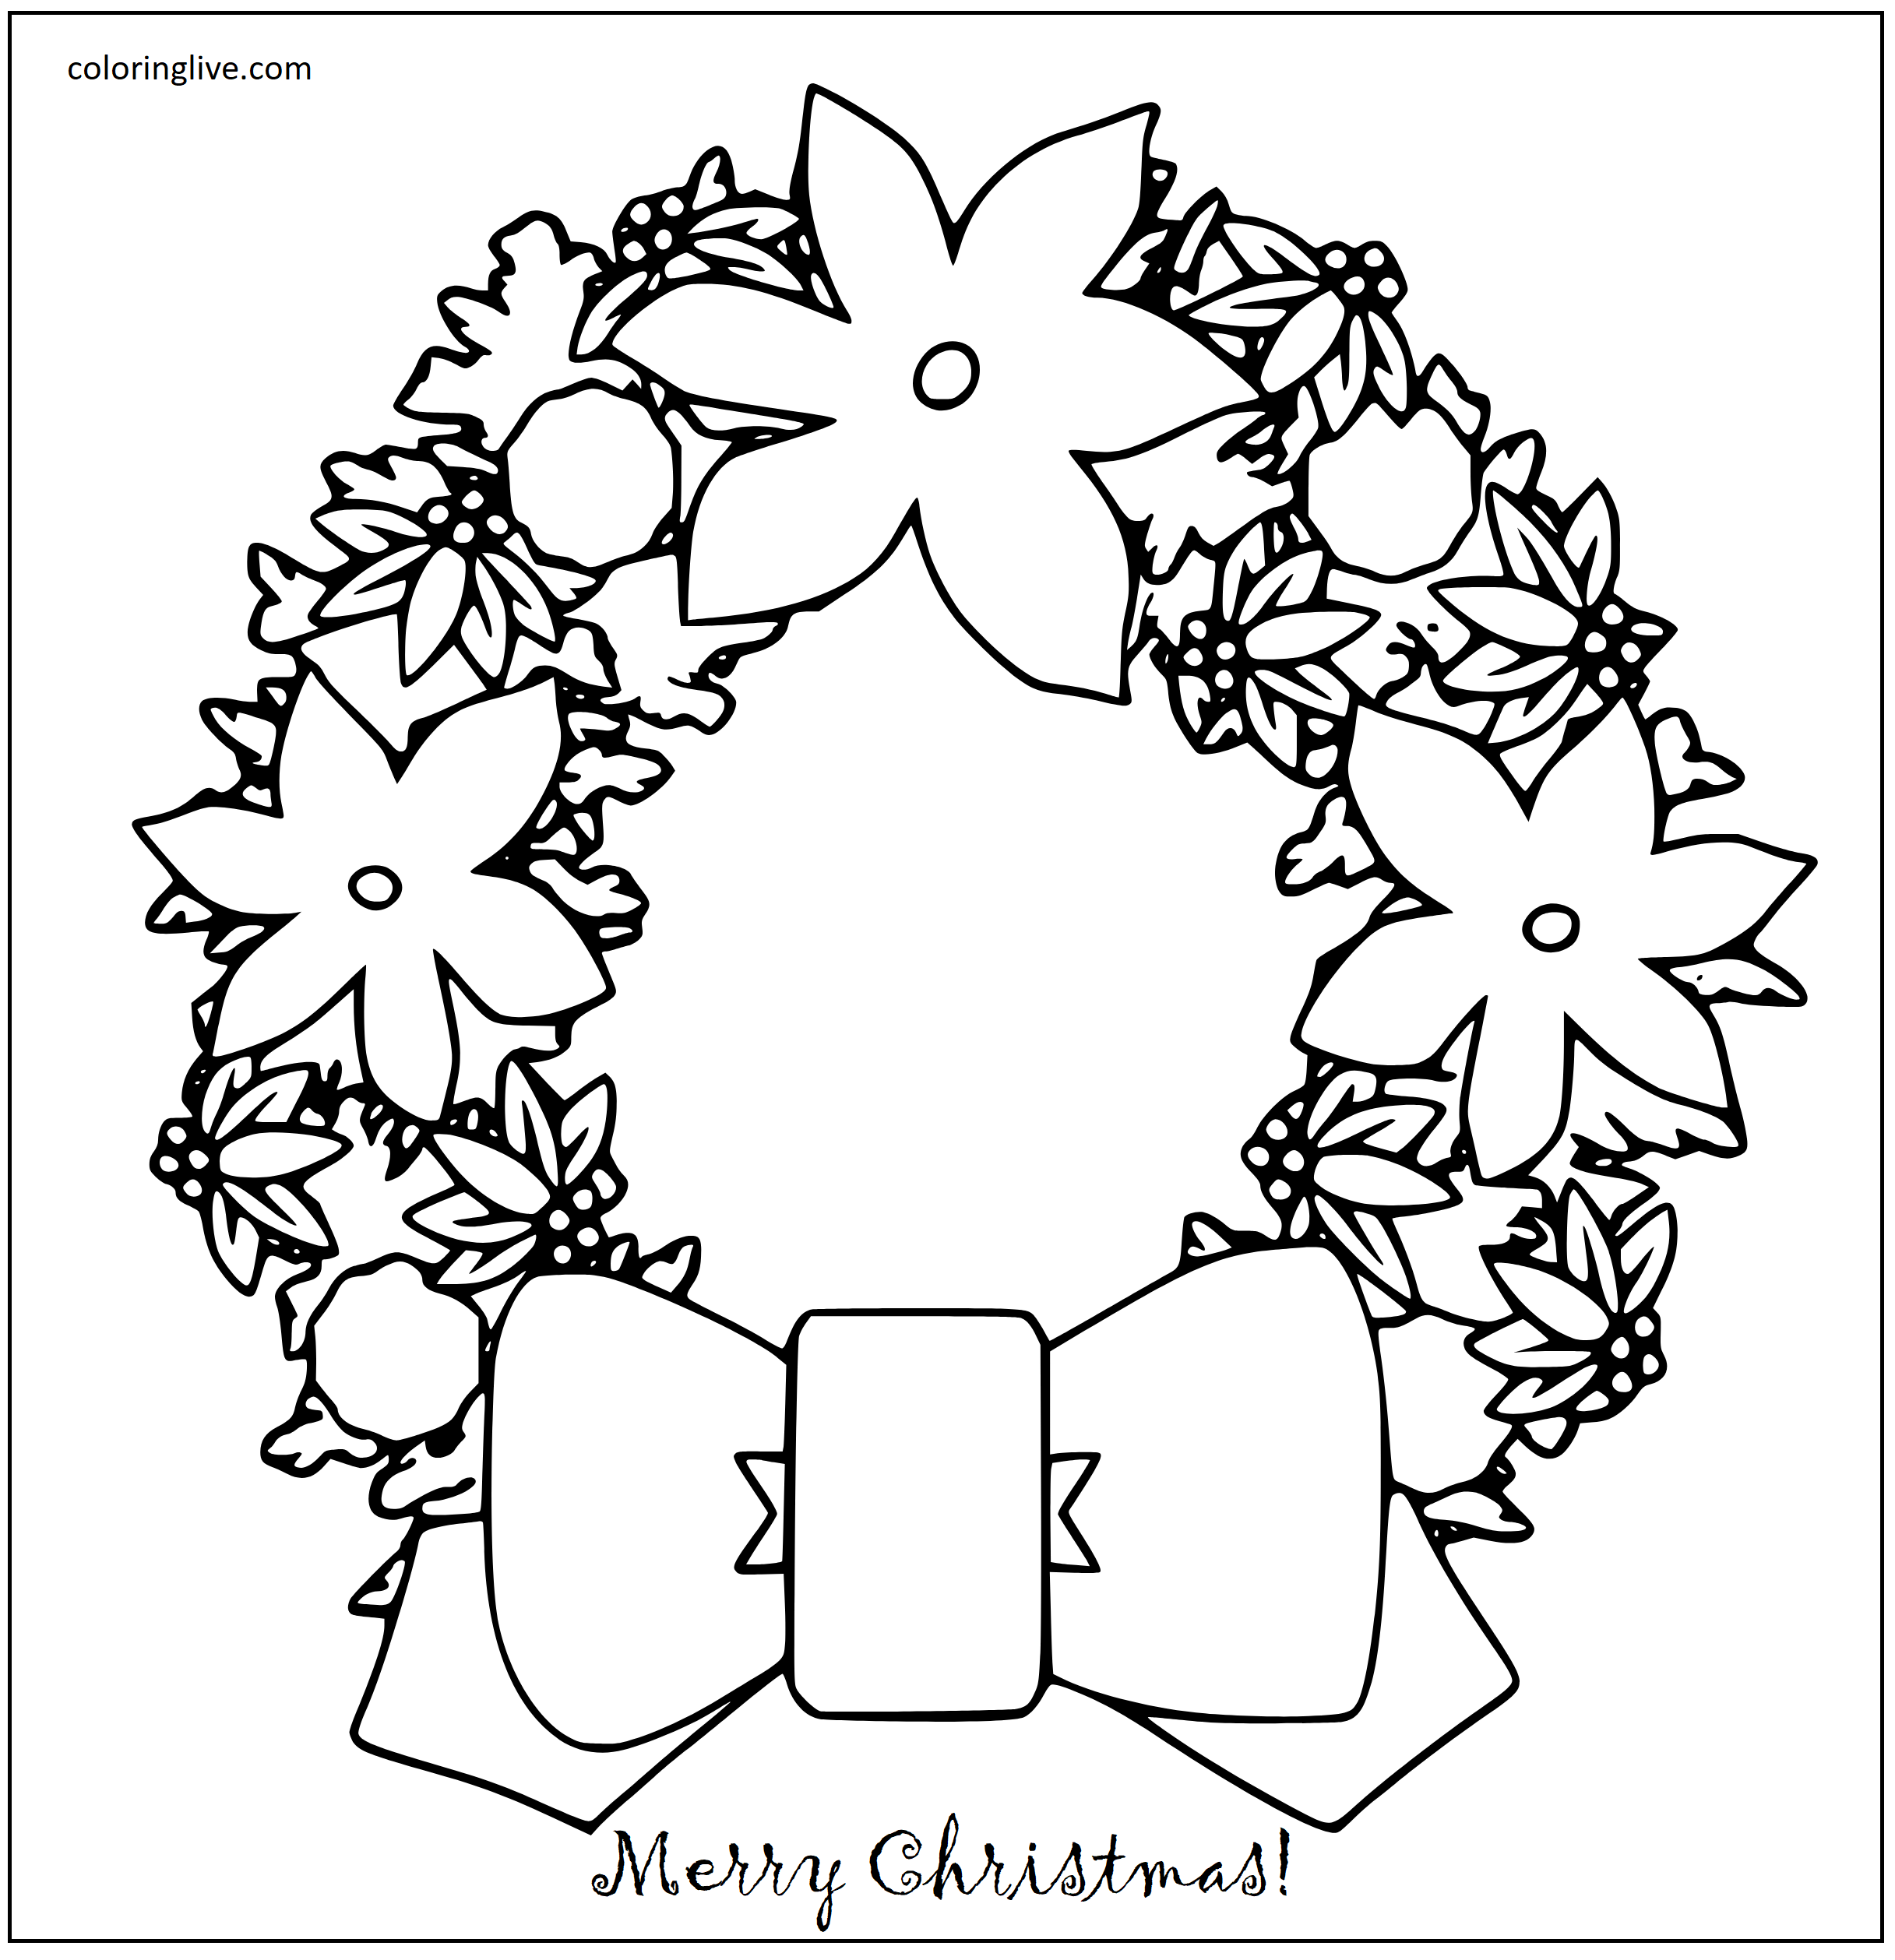 Printable Merry Christmas Wreath with a Bowknot Coloring Page for kids.